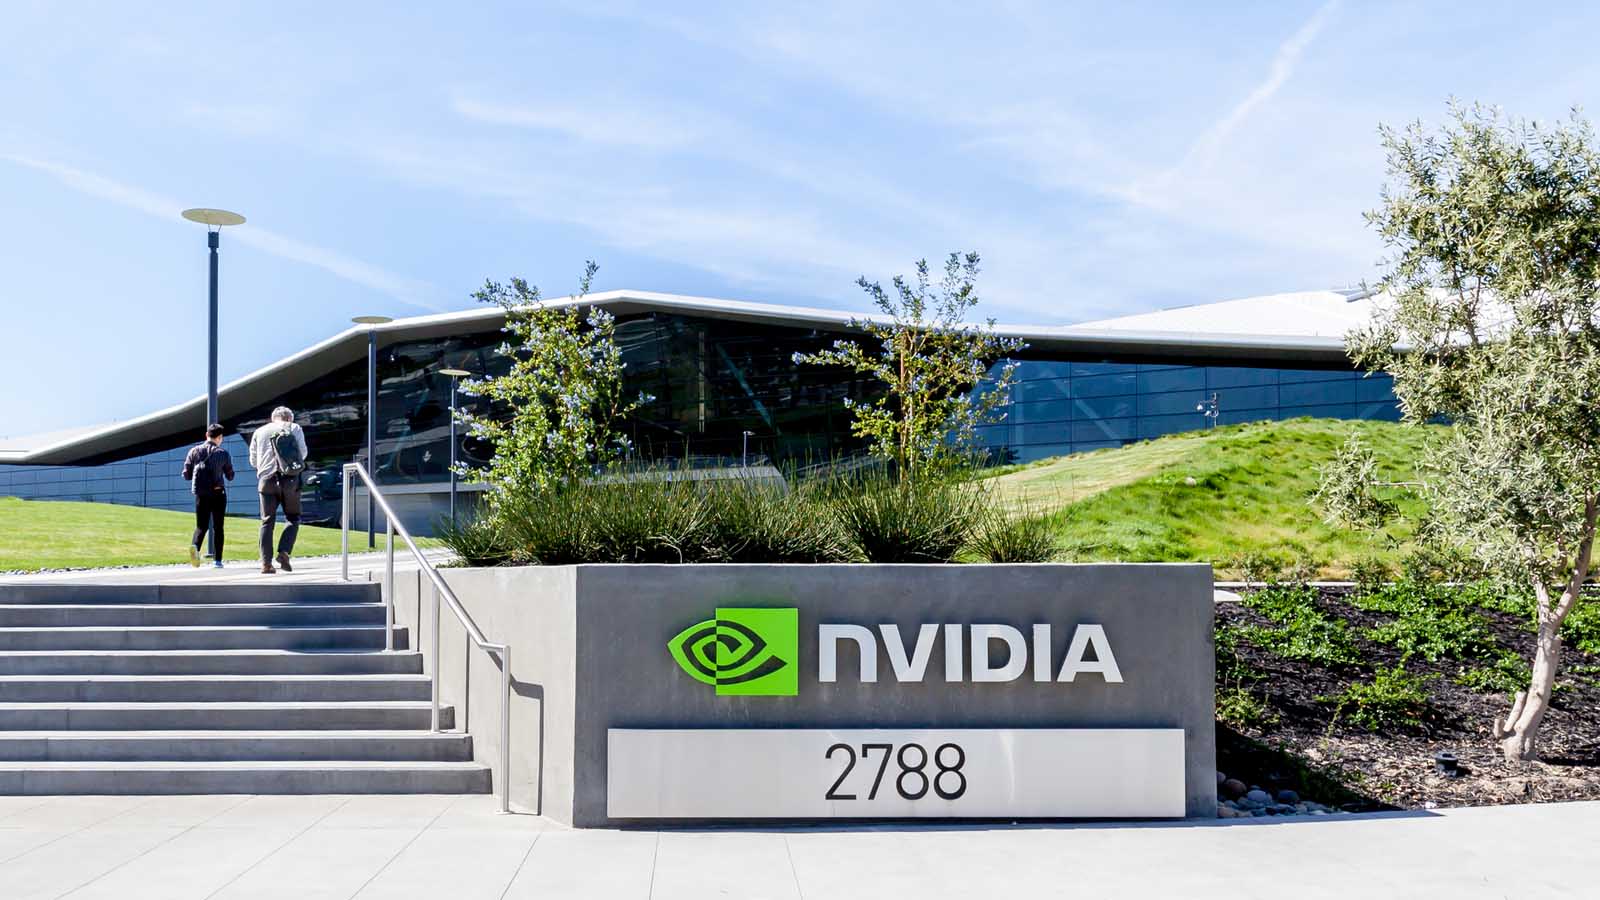 Nvdia (NVDA) office building with lime green logo on sign out front. Green grass and clear sky are visible..